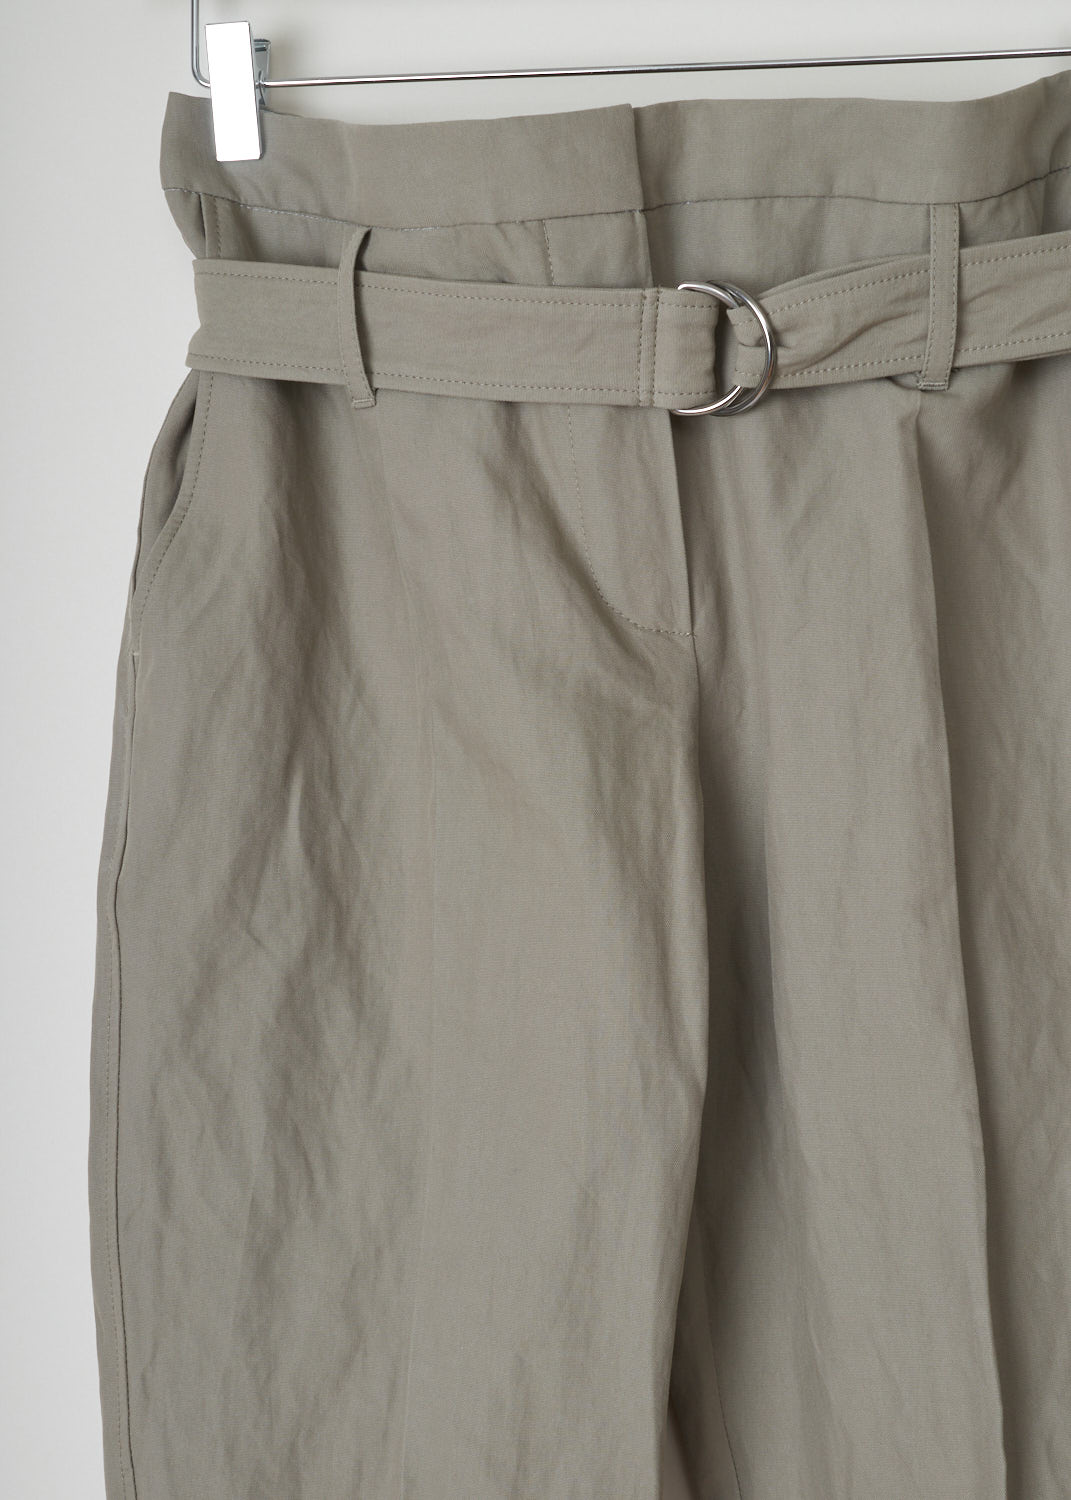 Brunello Cucinelli, khaki paperbag waist pants, M0H59P6542_C3673, green, detail, High-waisted paperbag pants with a D-ring belt. The cropped length allows you to show off any shoe you wear. As a closure option, this model has a zipper with metal clip and backing buttons. At the front, these pants have two side pockets and two welt pockets at the back.